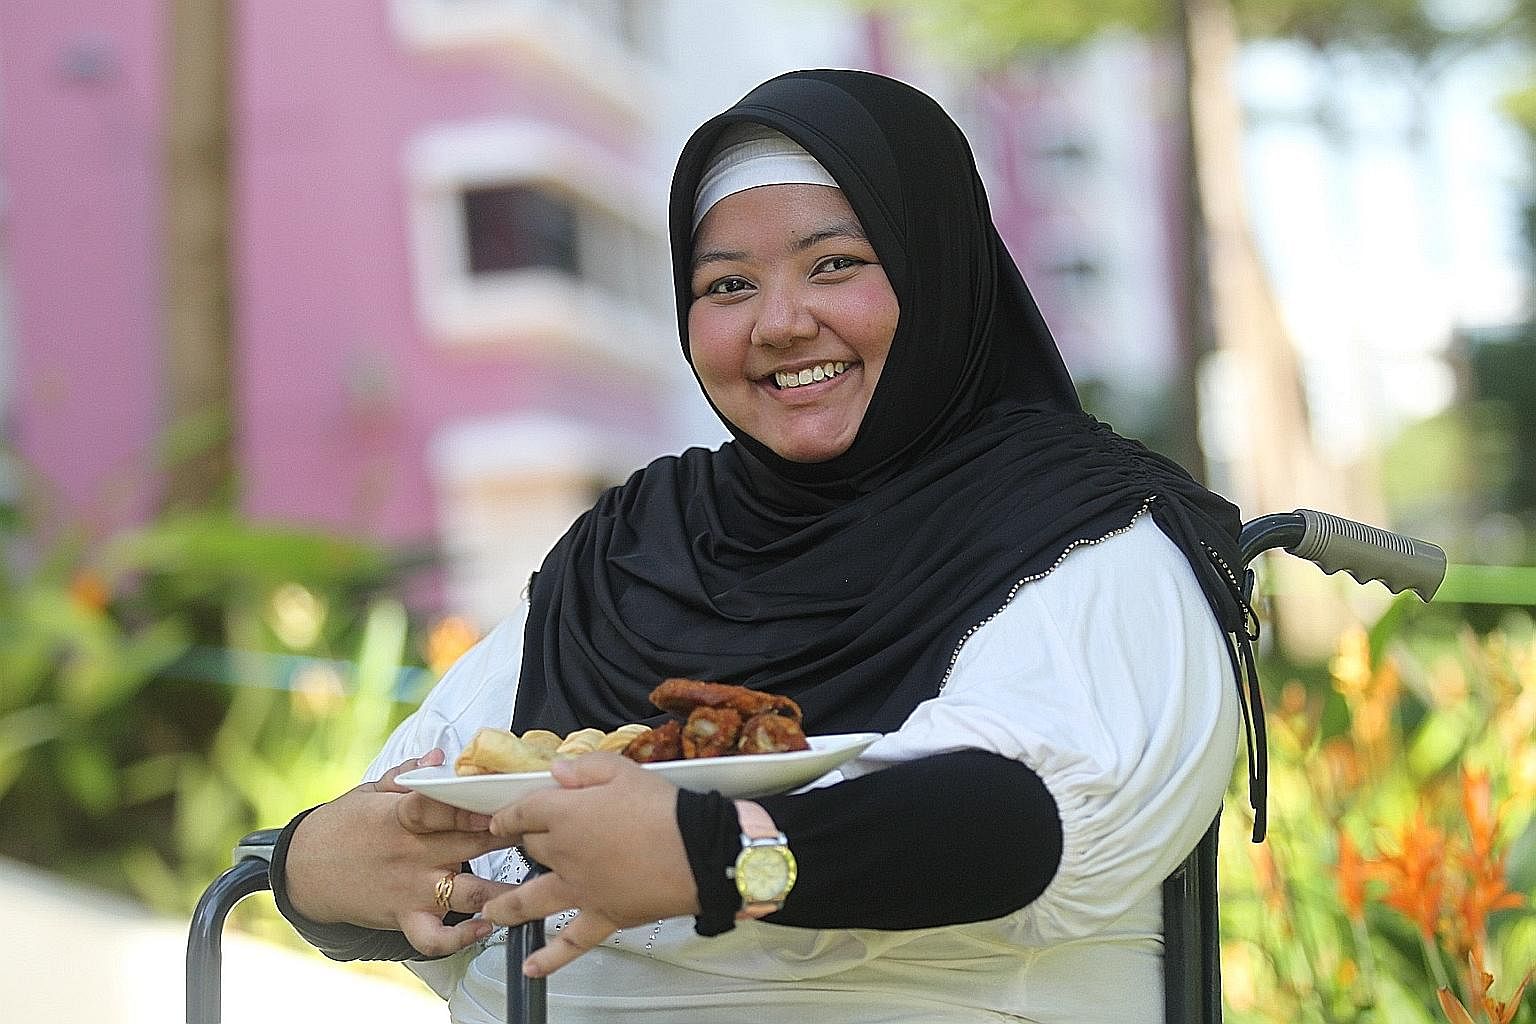 Ms Noor Ain Masaid, who used to be bedridden, started her ChixCheese food business in 2007. Today, she is able to produce the food on her own and donates profits from some orders to those in need.